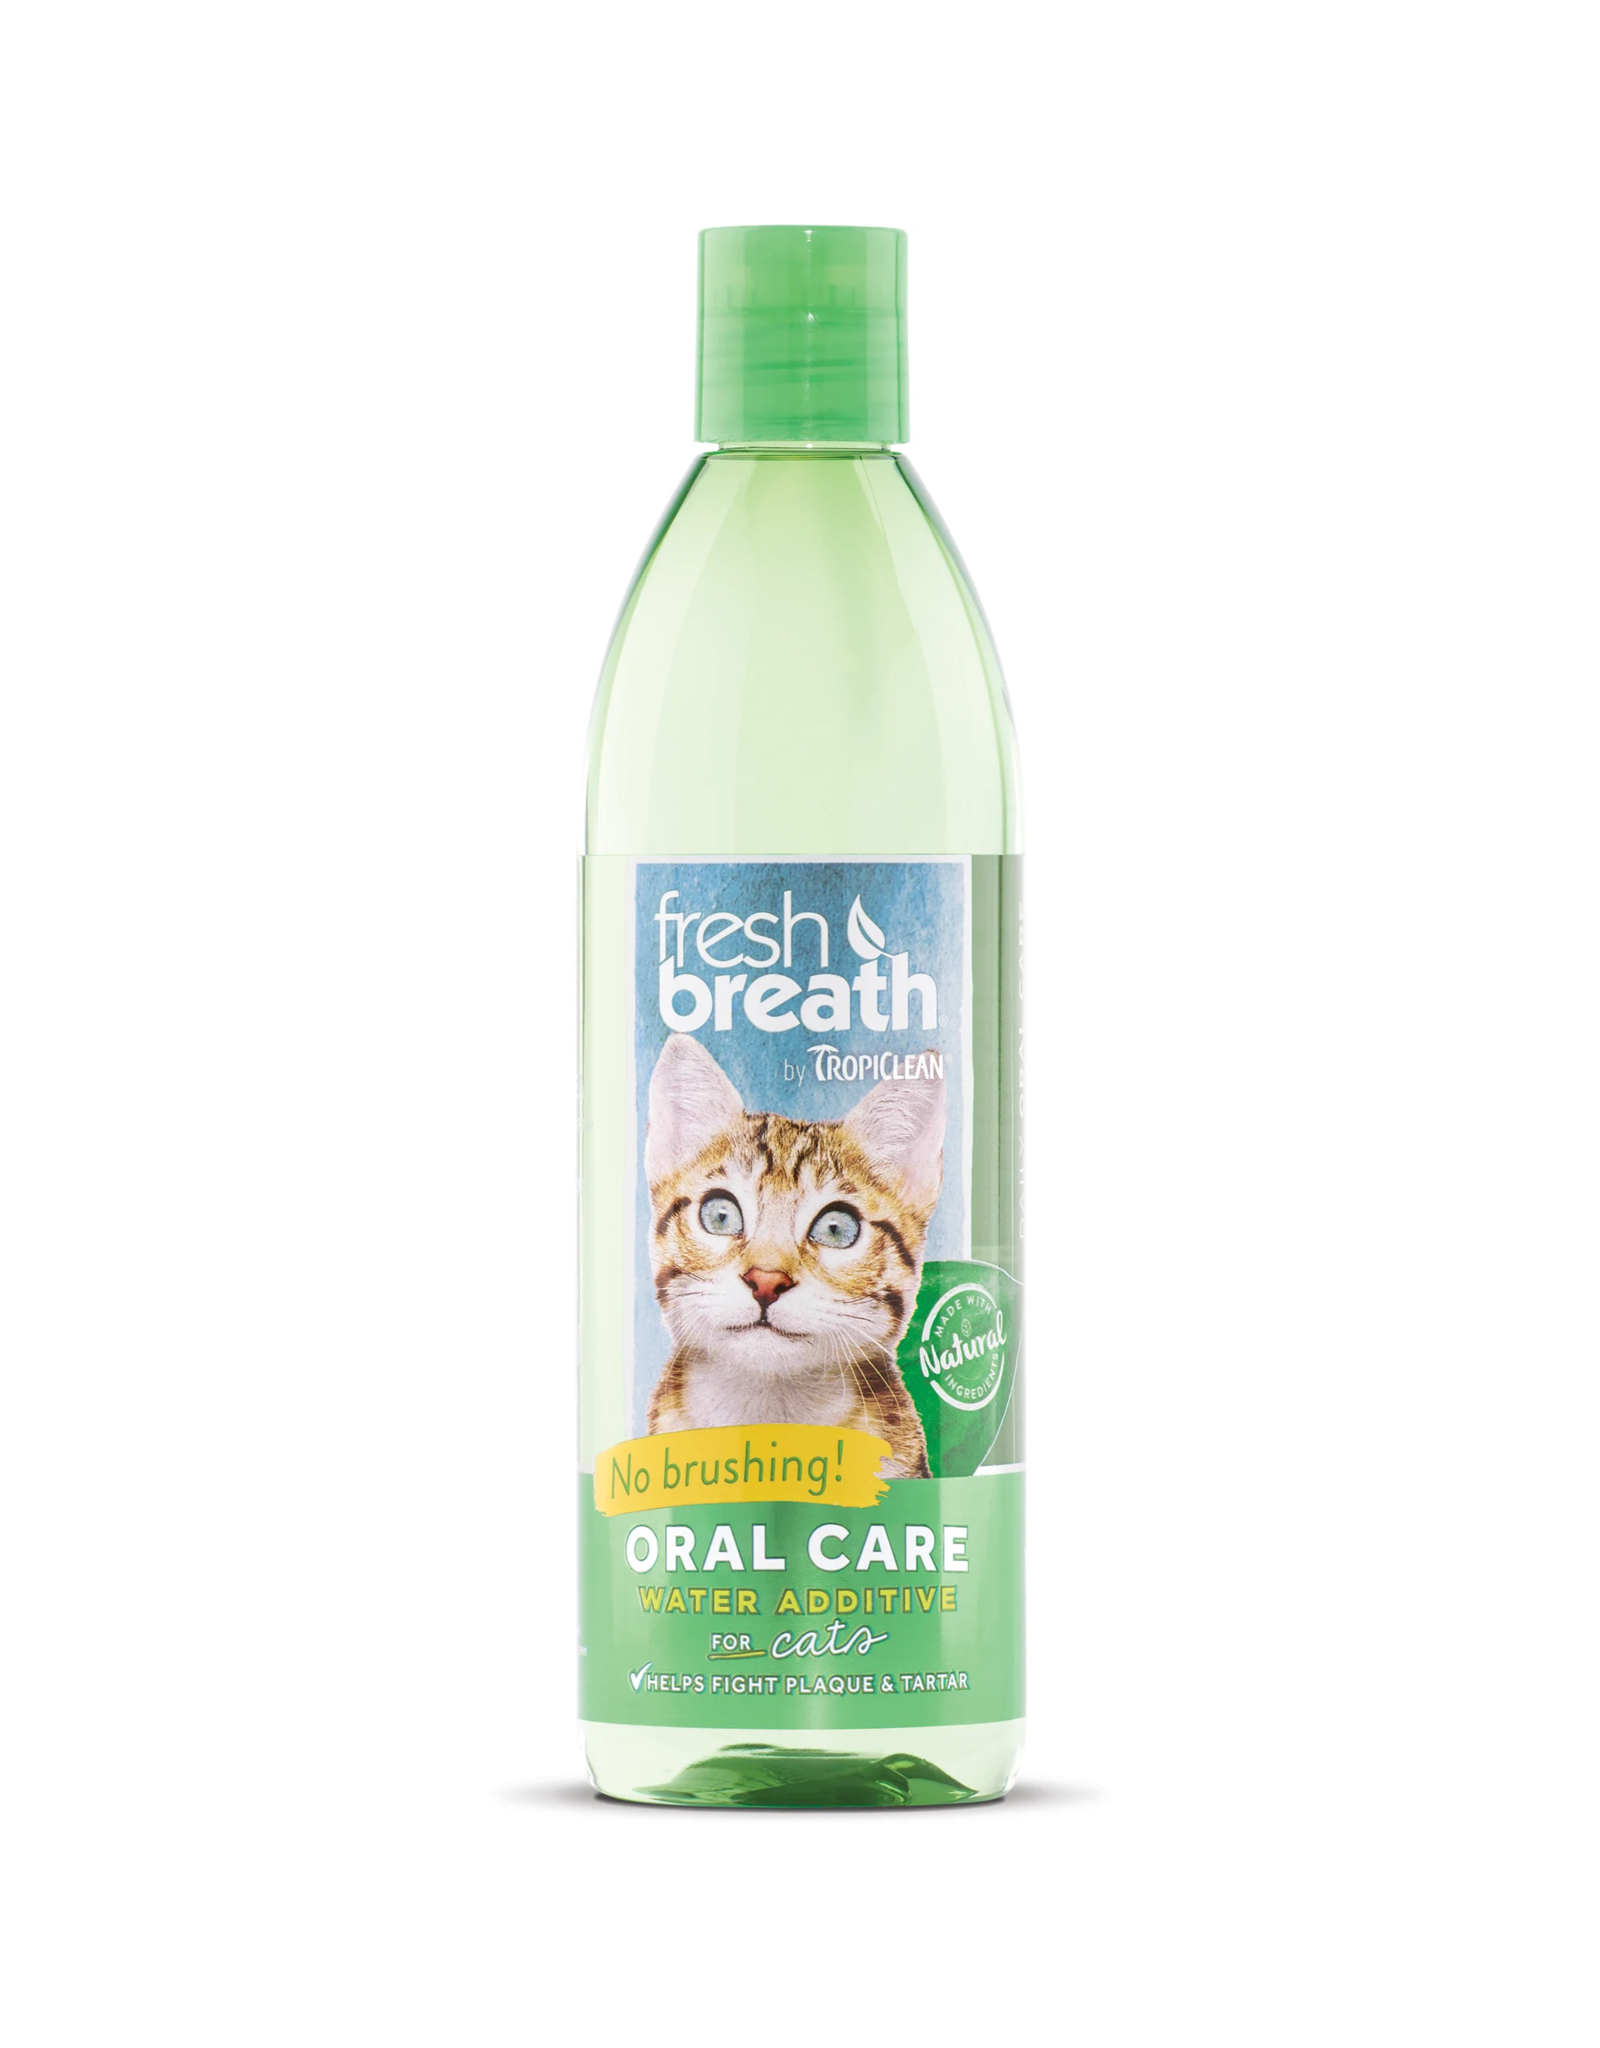 TropiClean TROPICLEAN FRESH BREATH ORAL CARE WATER ADDITIVE FOR CATS 16OZ